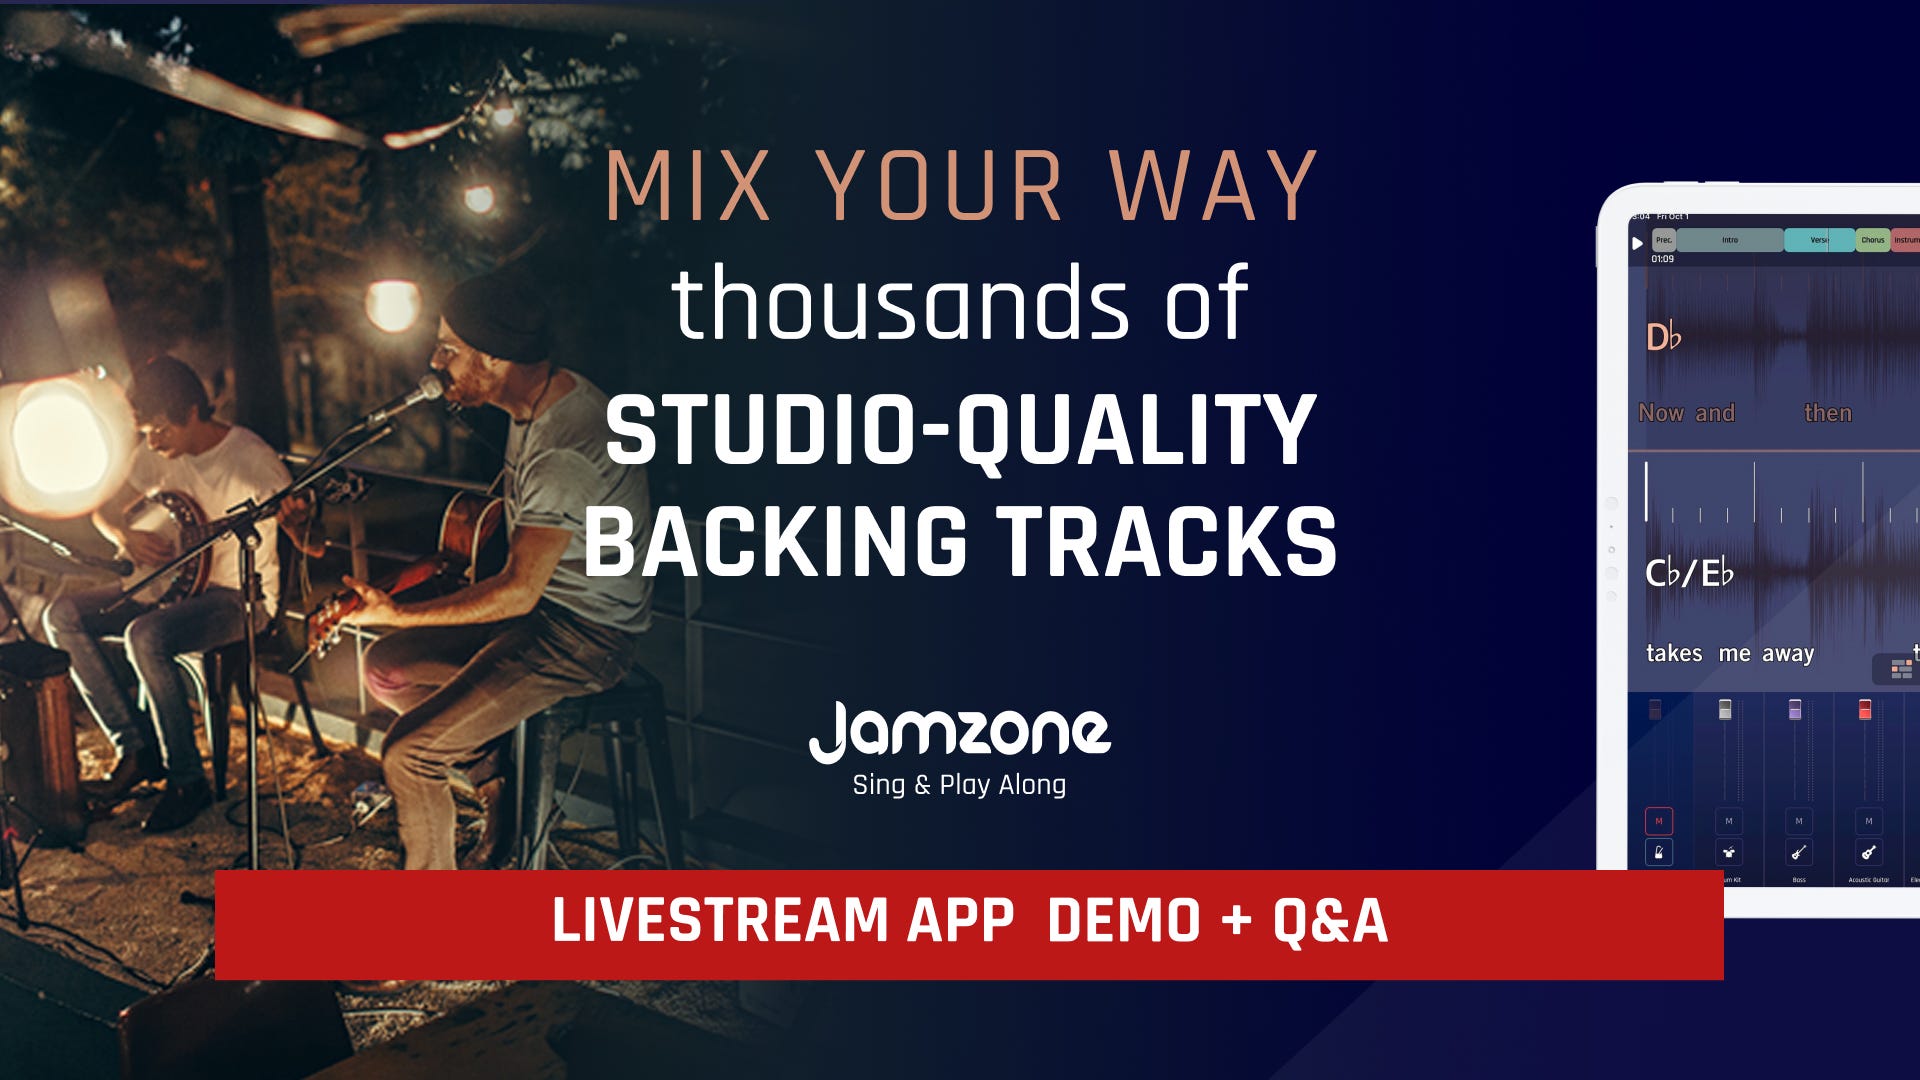 All our audio tracks now available. Facebook LIVE: App DEMO + Q&A Love  or Loathe Valentine's?